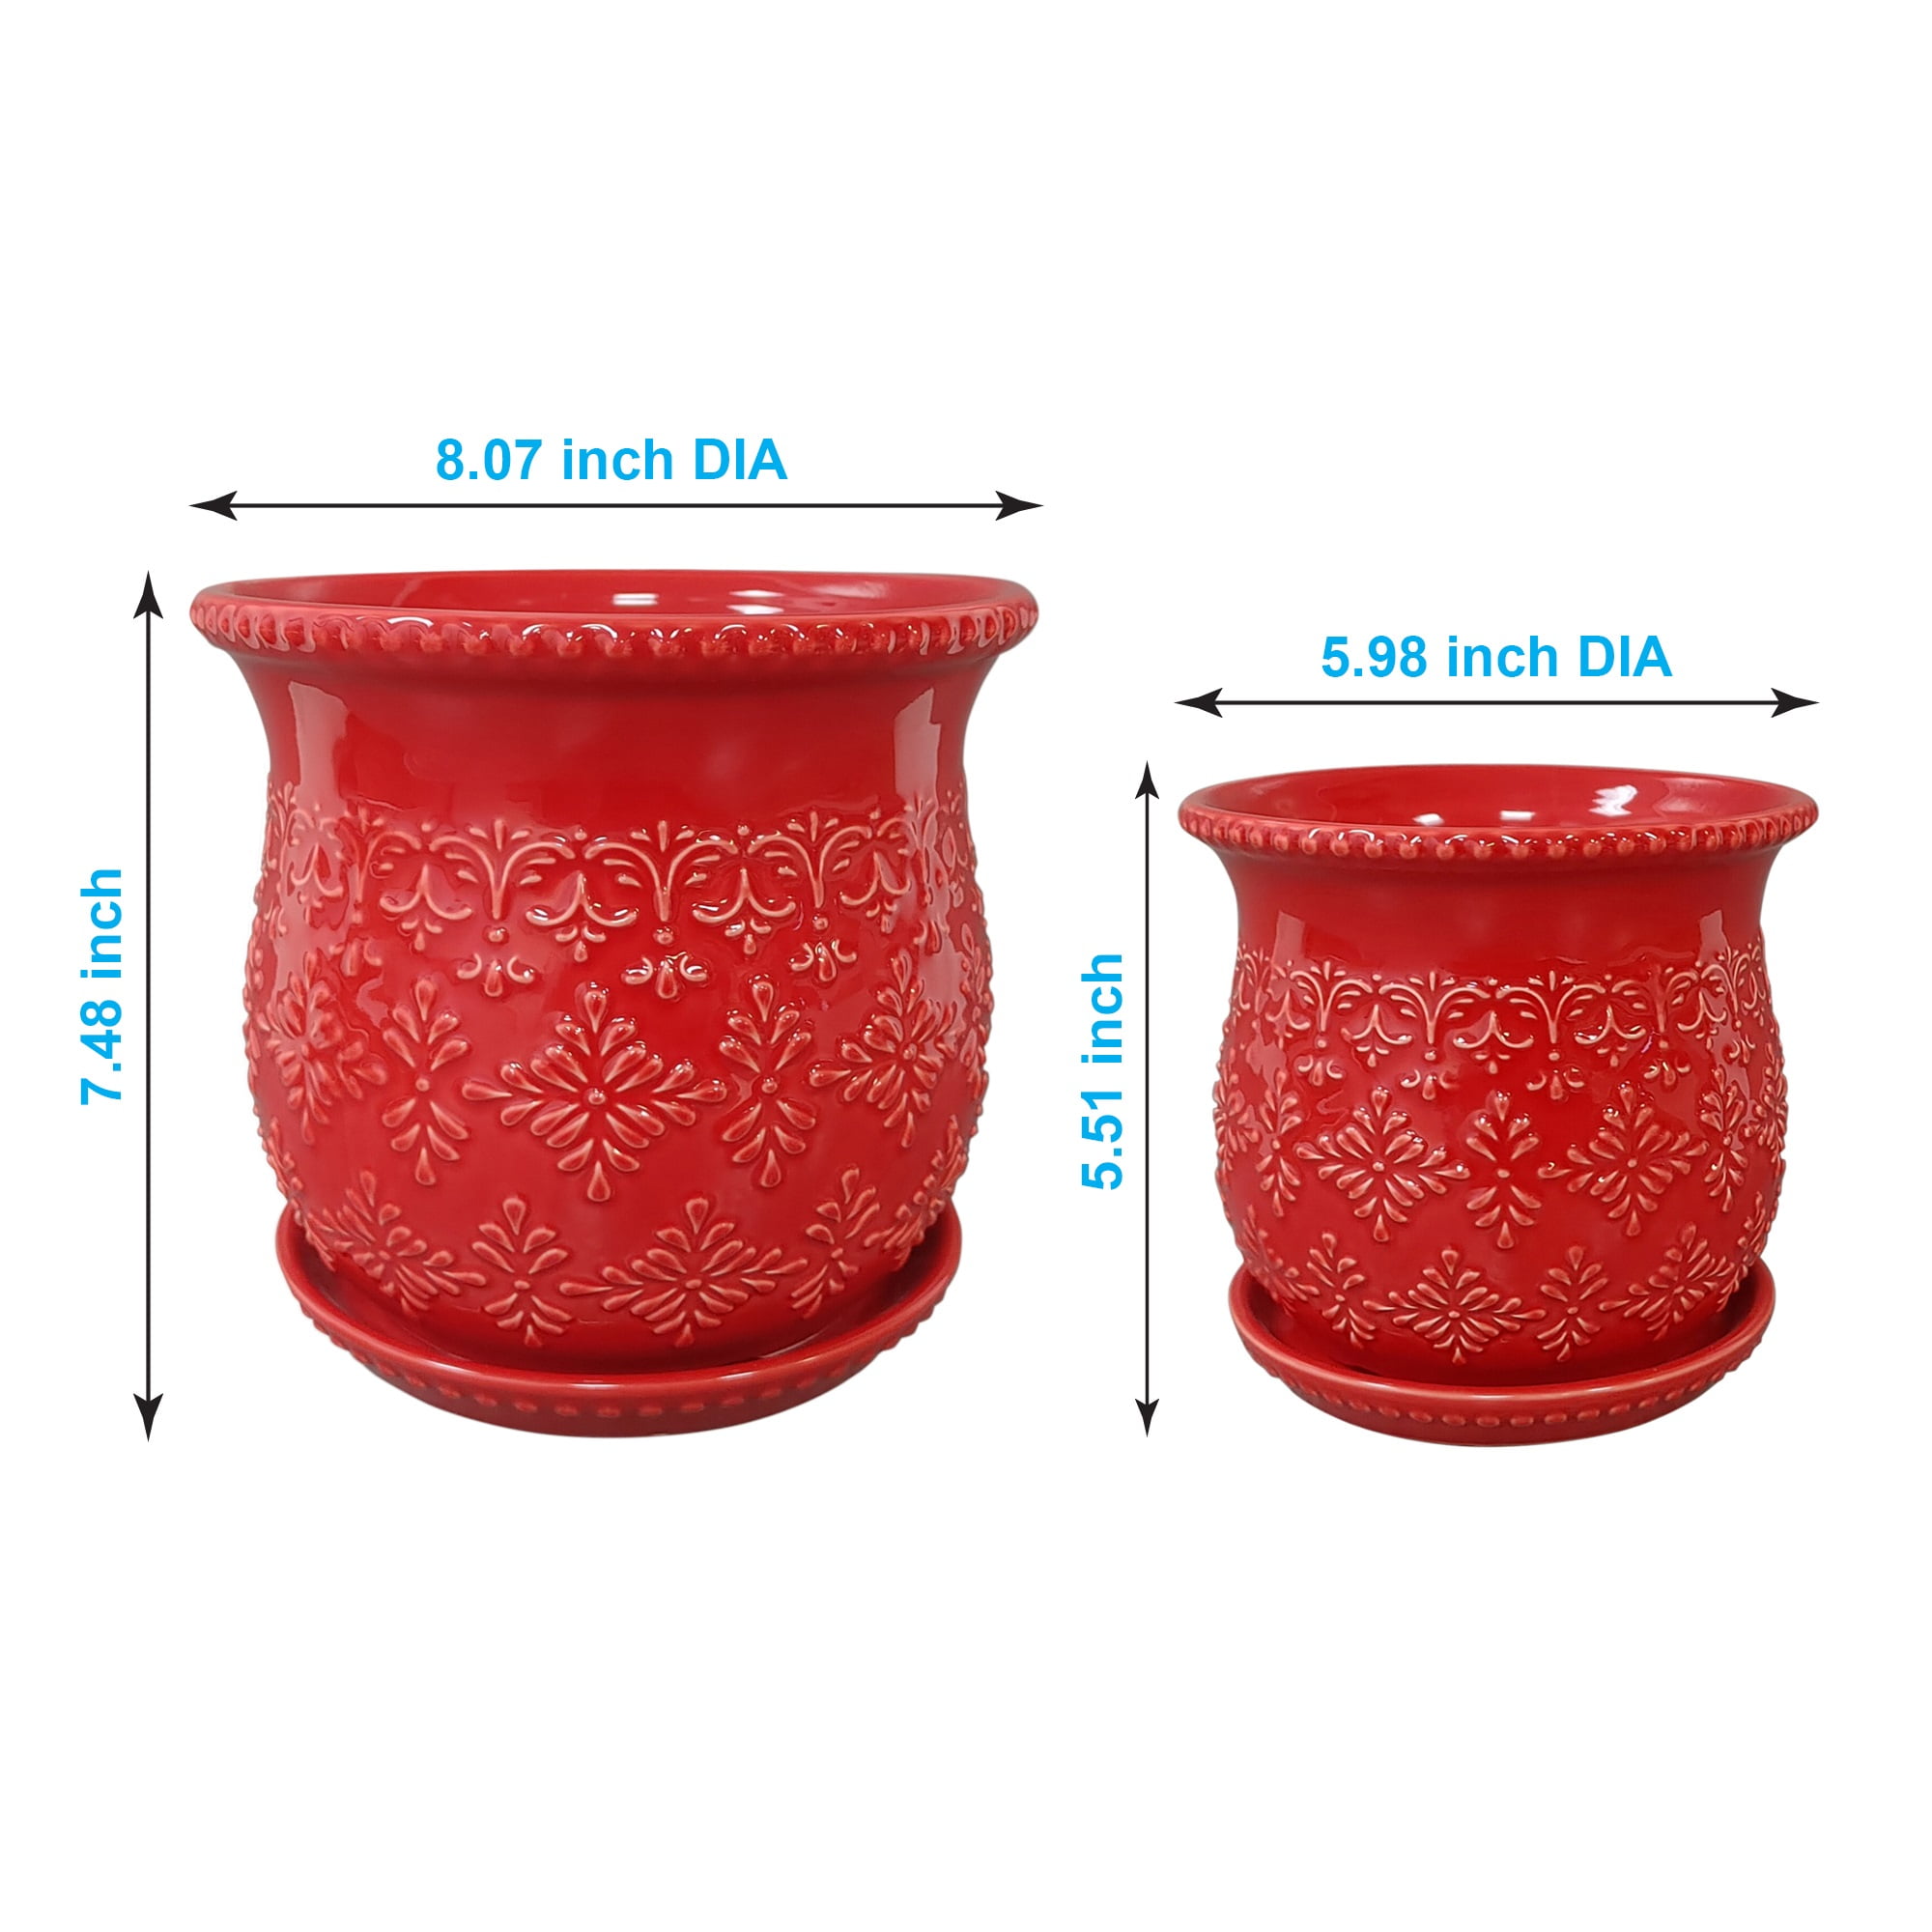 Flower button - Size: 28mm - Color: red - Art.No. 340708